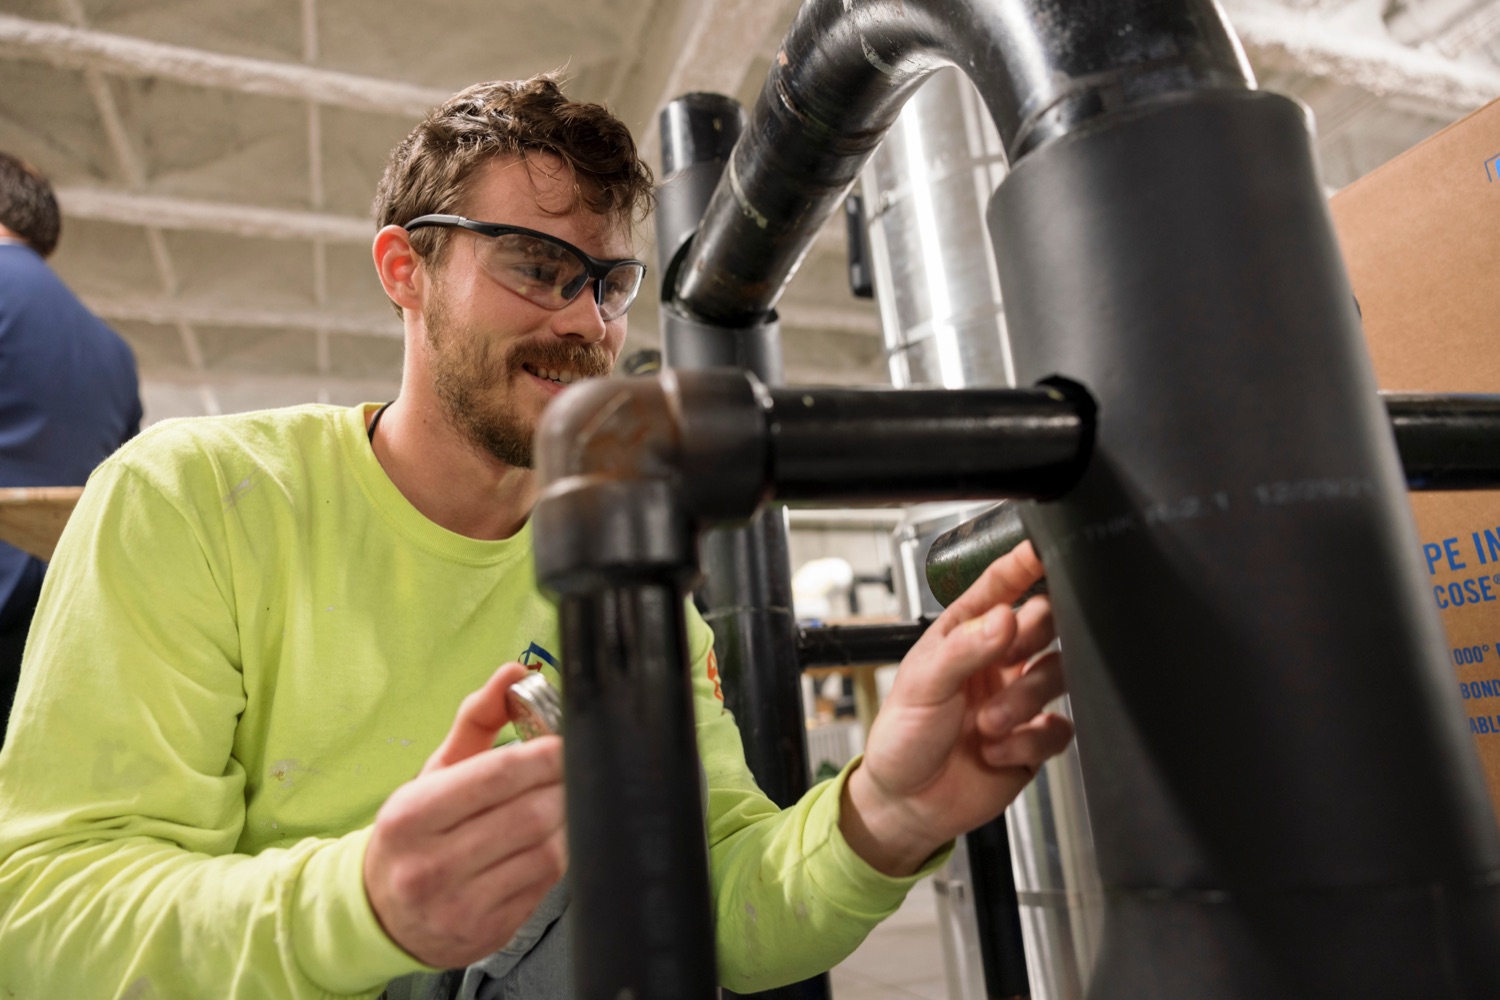 Jesse Welk, 27, works on a mock pipe following a press conference which kicked off National Apprenticeship Week with a visit to Heat and Frost Insulators Local 23, a training center in Dauphin County, on Monday, November 14, 2022. National Apprenticeship Week (NAW) is a nationwide celebration for industry, labor, equity, workforce, education and government leaders to showcase the successes and value of registered apprenticeship for building our economy, advancing racial and gender equity, and supporting underserved communities.<br><a href="https://filesource.amperwave.net/commonwealthofpa/photo/22344_li_apprenticeshipweek_NK_005.JPG" target="_blank">⇣ Download Photo</a>